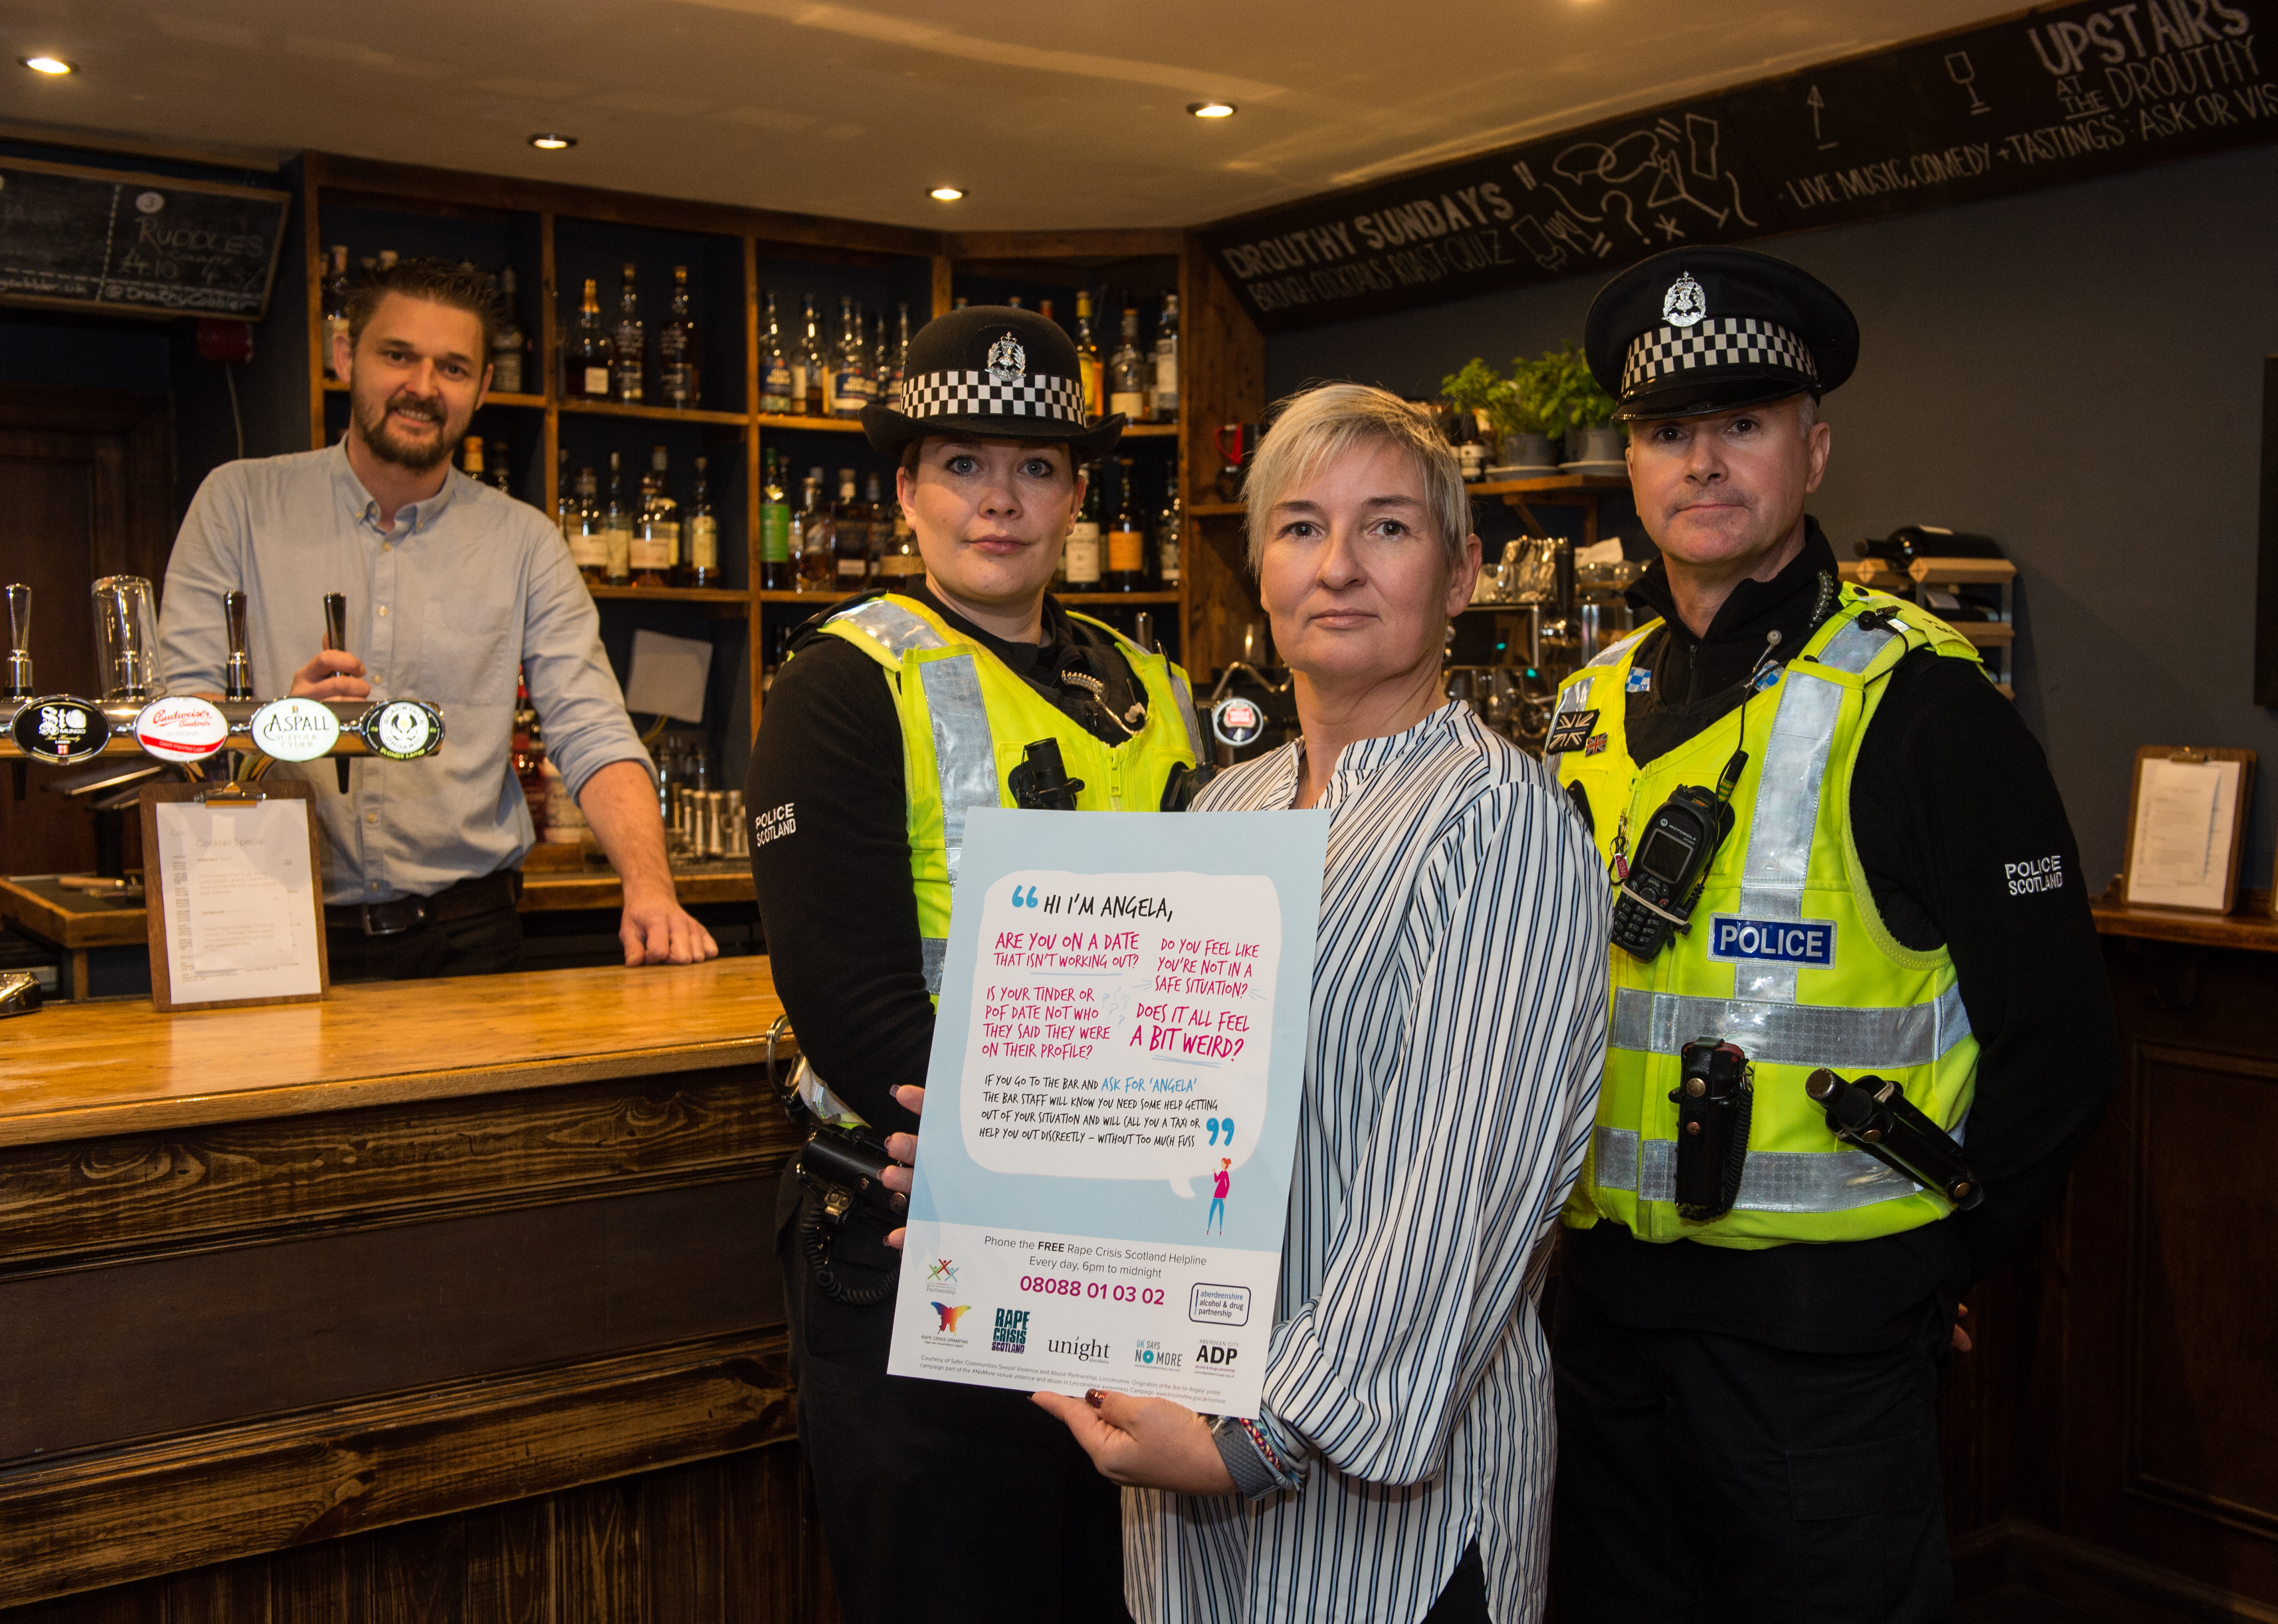 Police launch Ask for Angela campaig.

Pictured left to right: Marek Marusinex (Bar Manager) PC Nicola Curley, Joanne Larsen (Licensing Standards Officer for Moray Council) and PC Jad Leach